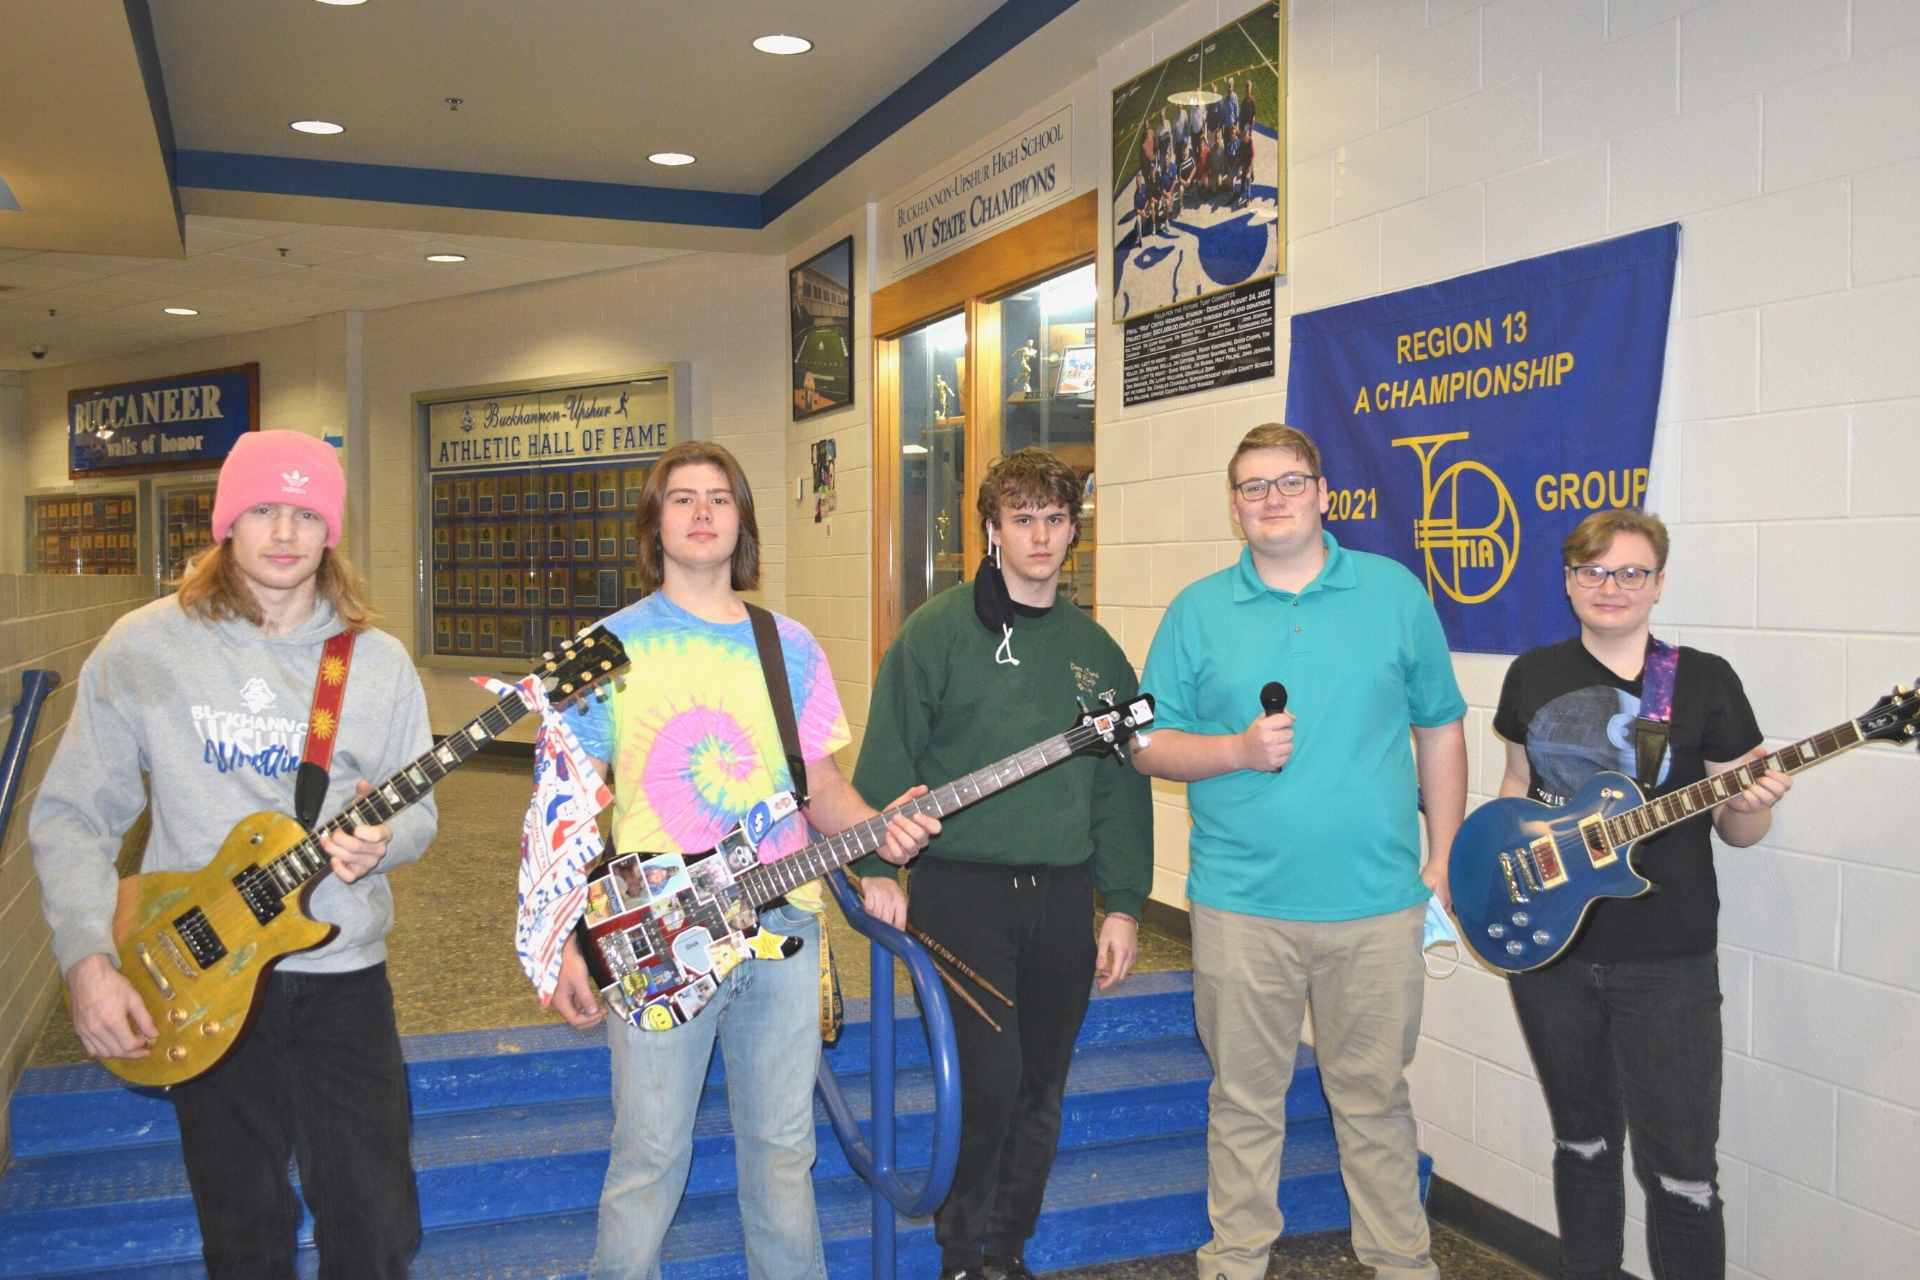 Buckhannon-Upshur High School offers a new class in music called ‘rock band.’ Pictured are class members Trevur THE WURST Randolph, a senior; senior John Hayes; junior Elijah Carr; Kayla Currence, a senior; and Dylan Fox, a senior. The band director at Buckhannon-Upshur High School is Eliza Taylor.